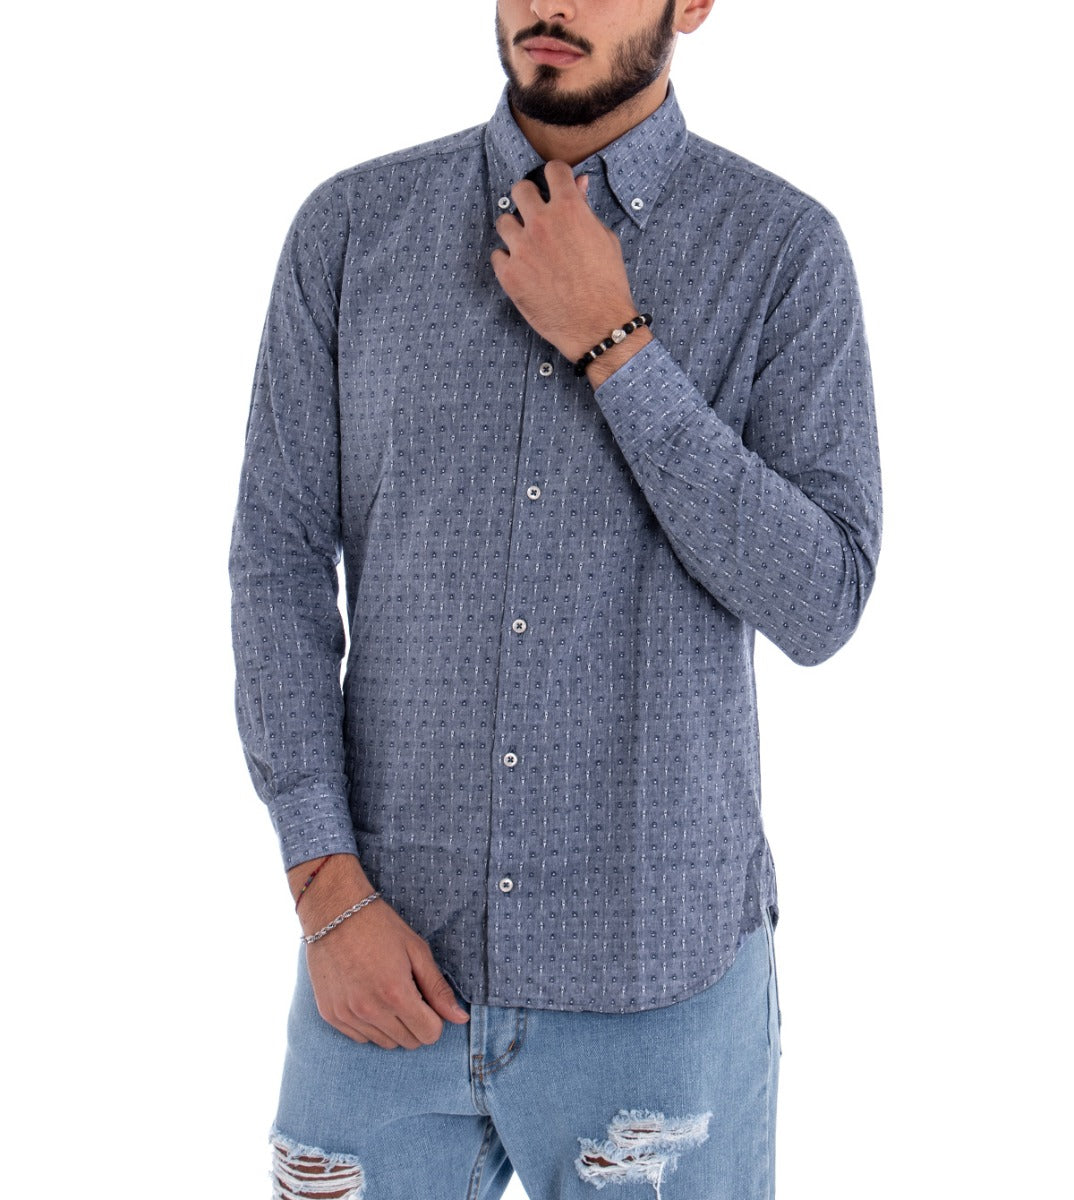 Men's Shirt With Collar Long Sleeve Slim Fit Casual Cotton Polka Dot Pattern Blue GIOSAL-C1468A